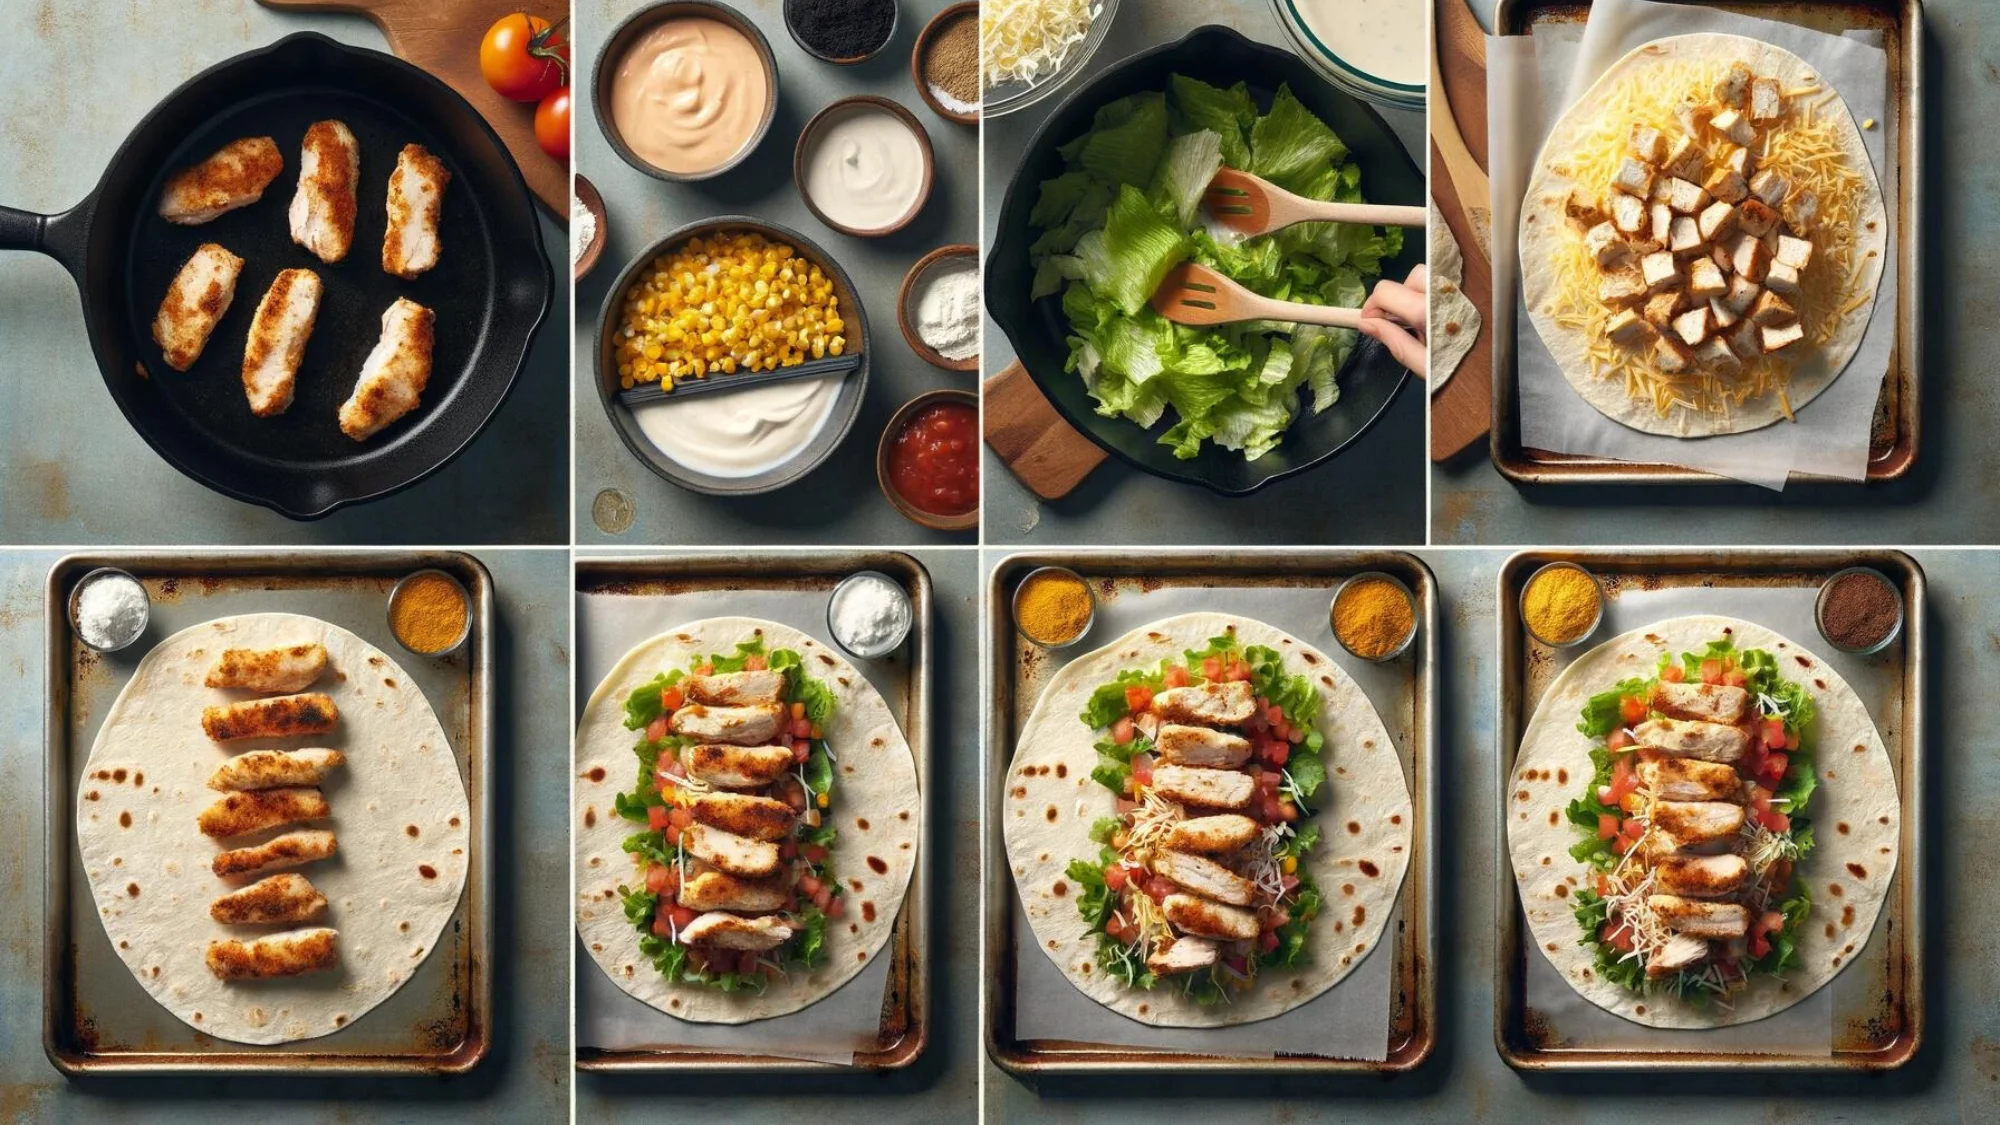 step-by-step images and descriptions for making a Southwest Chicken Wrap